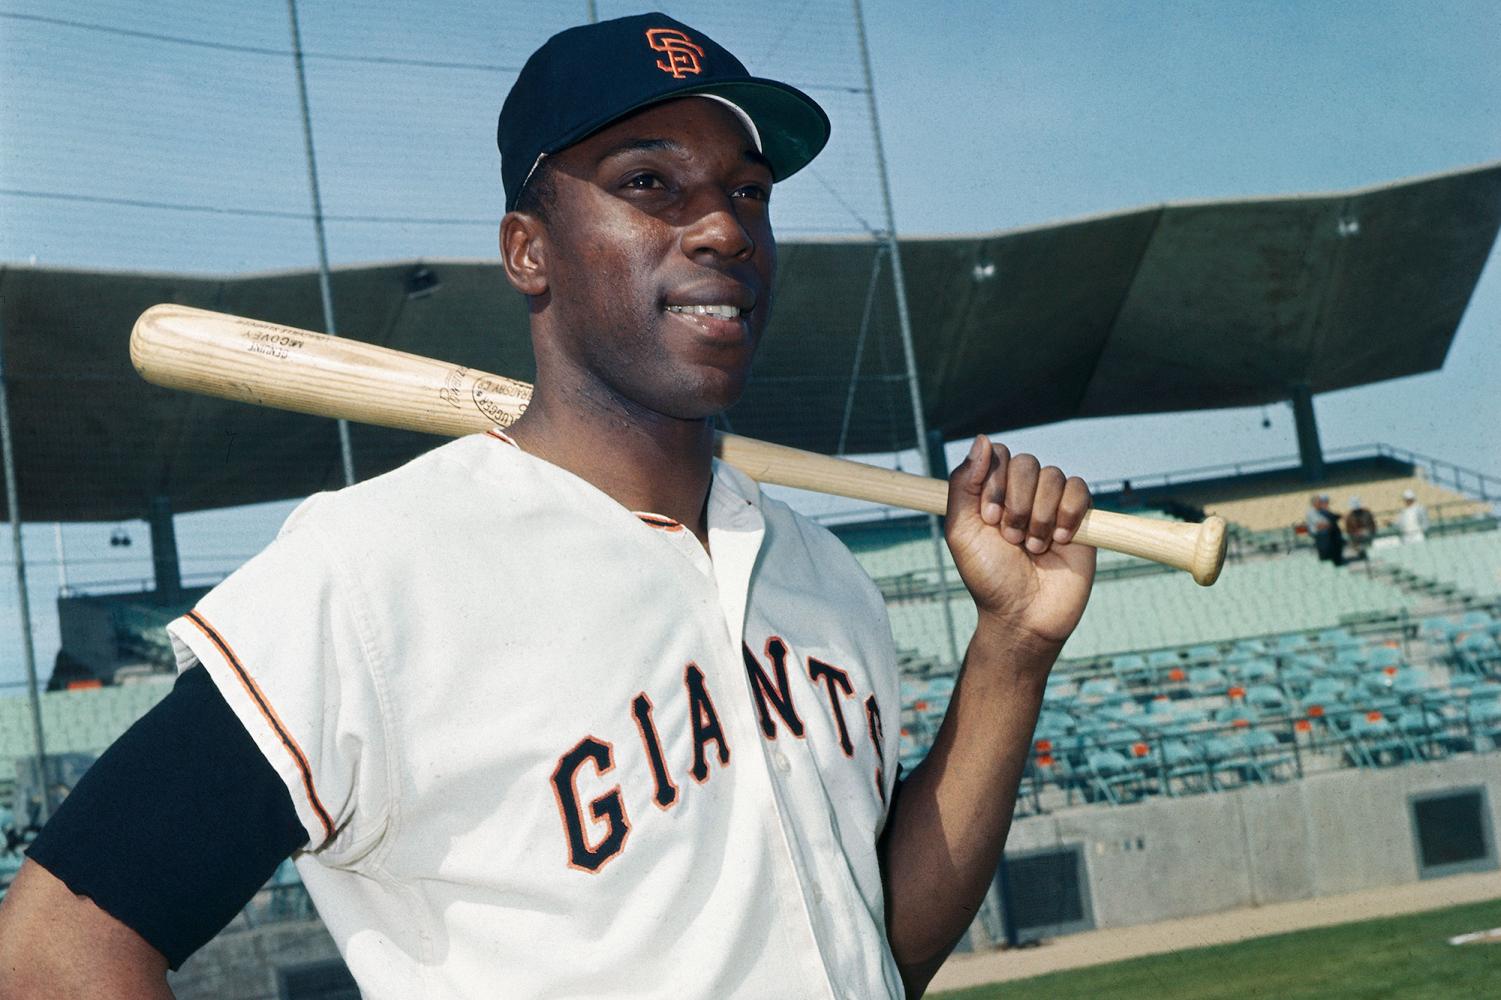 Remembering Giants legend Willie 'Stretch' McCovey – The Crusader